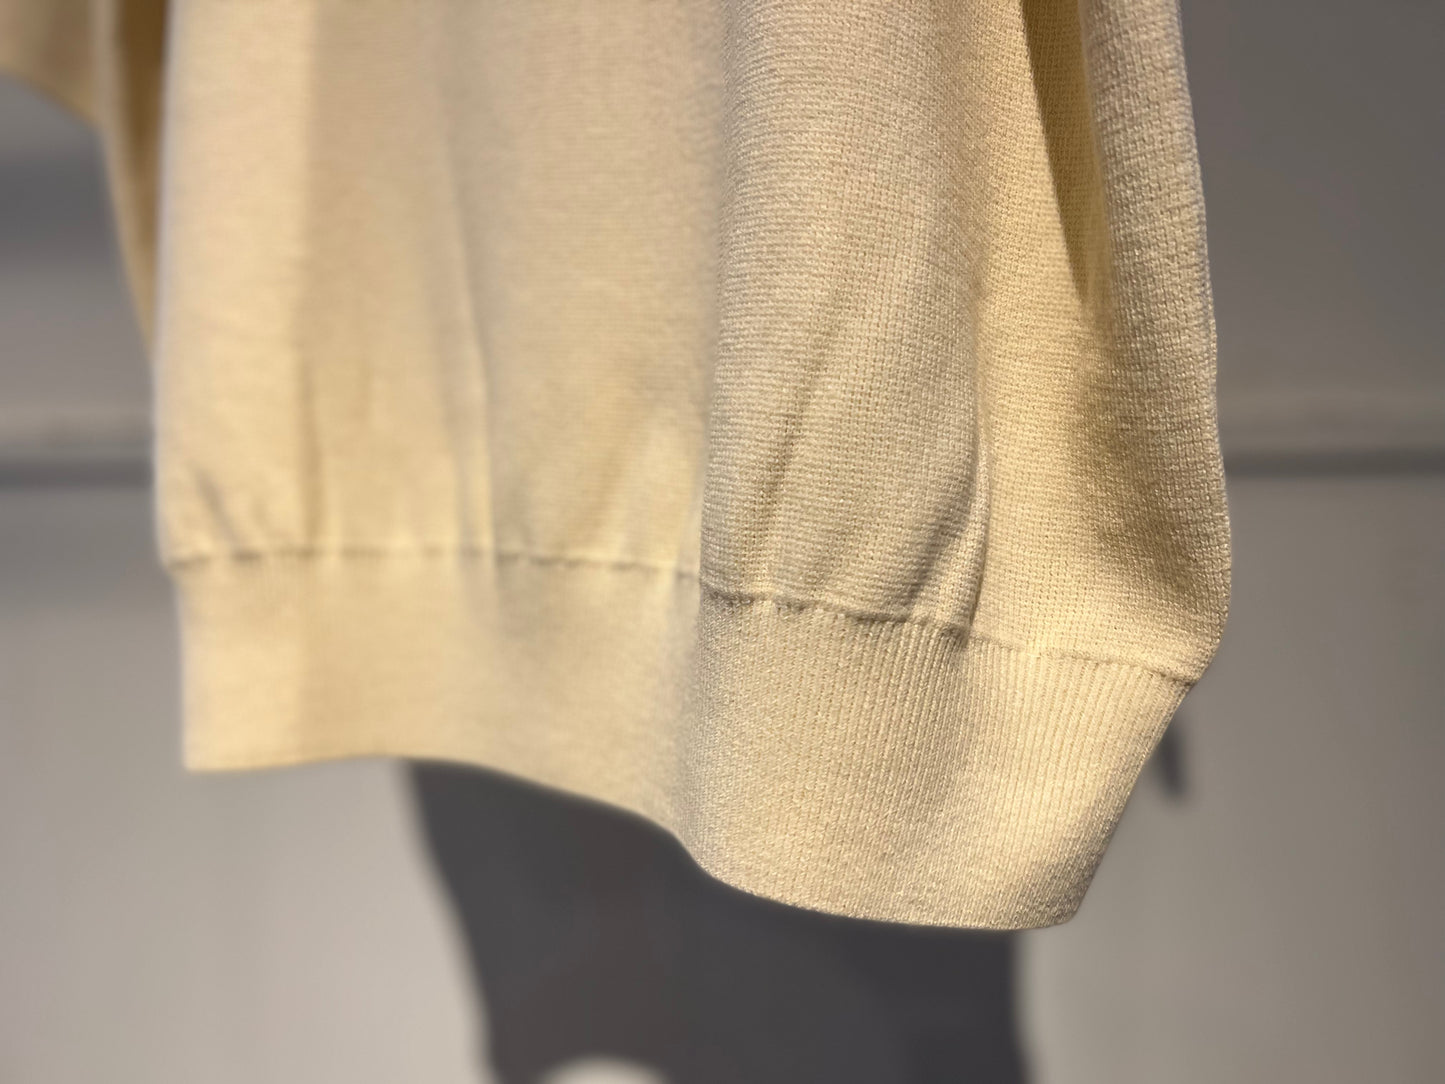 24SS Slopeslow / スロープスロー "polo sweater"